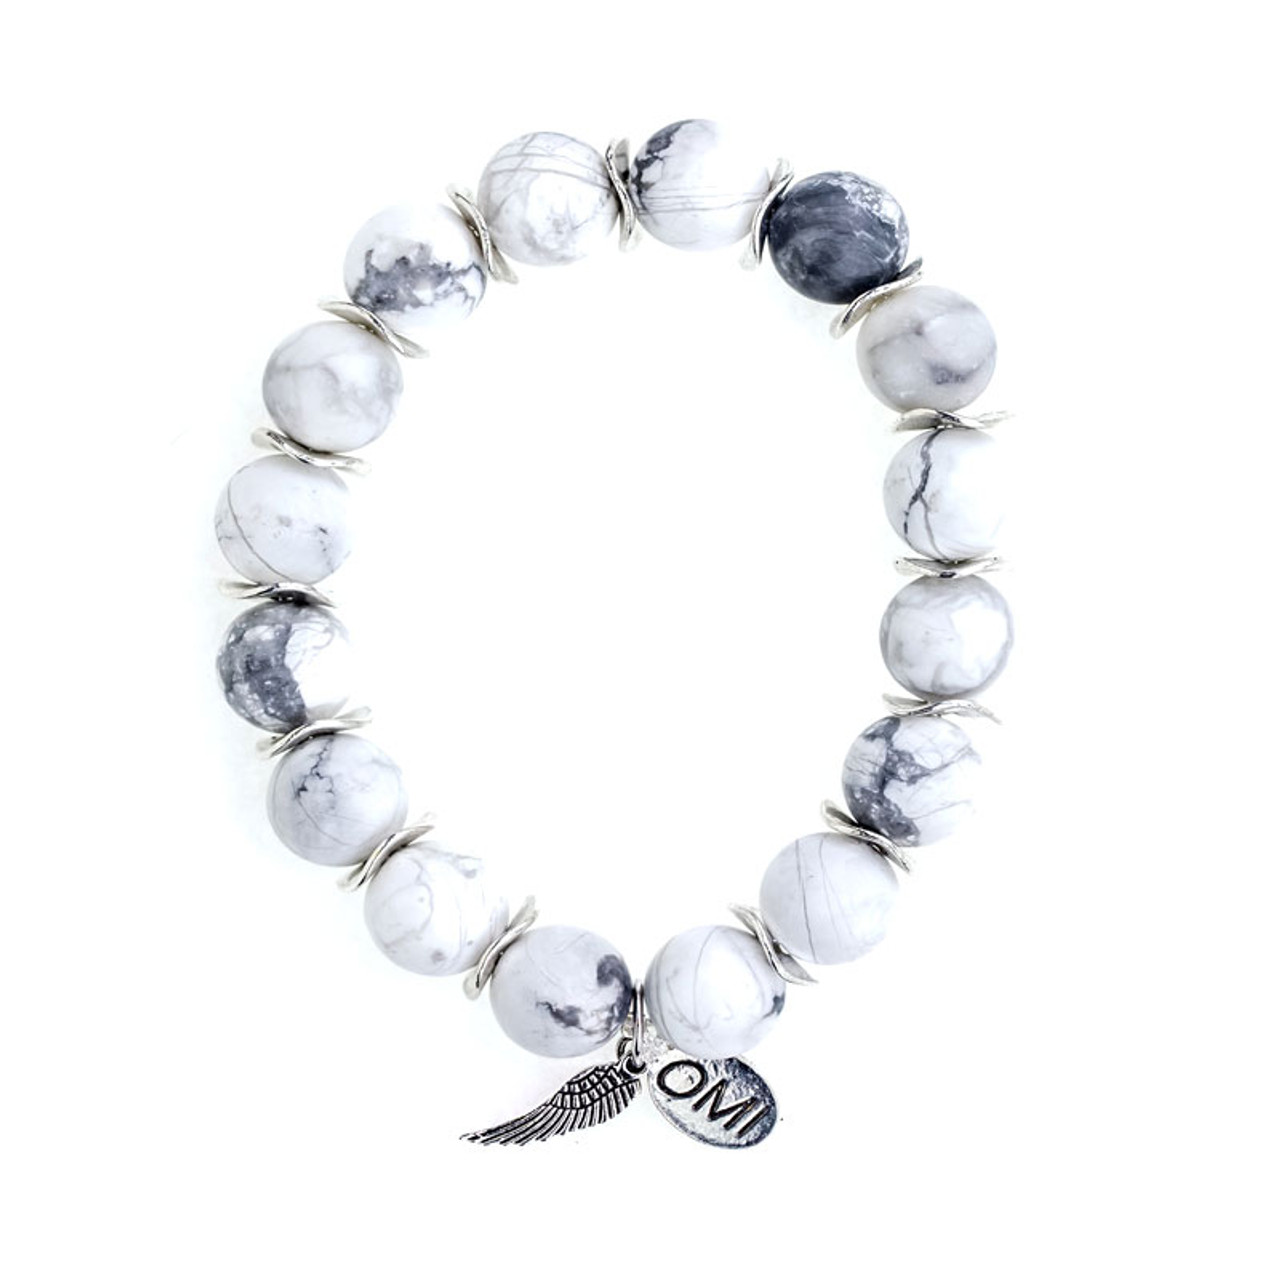 White Marble Howlite Stone Bead Bracelet with Silver Spacers - 10mm